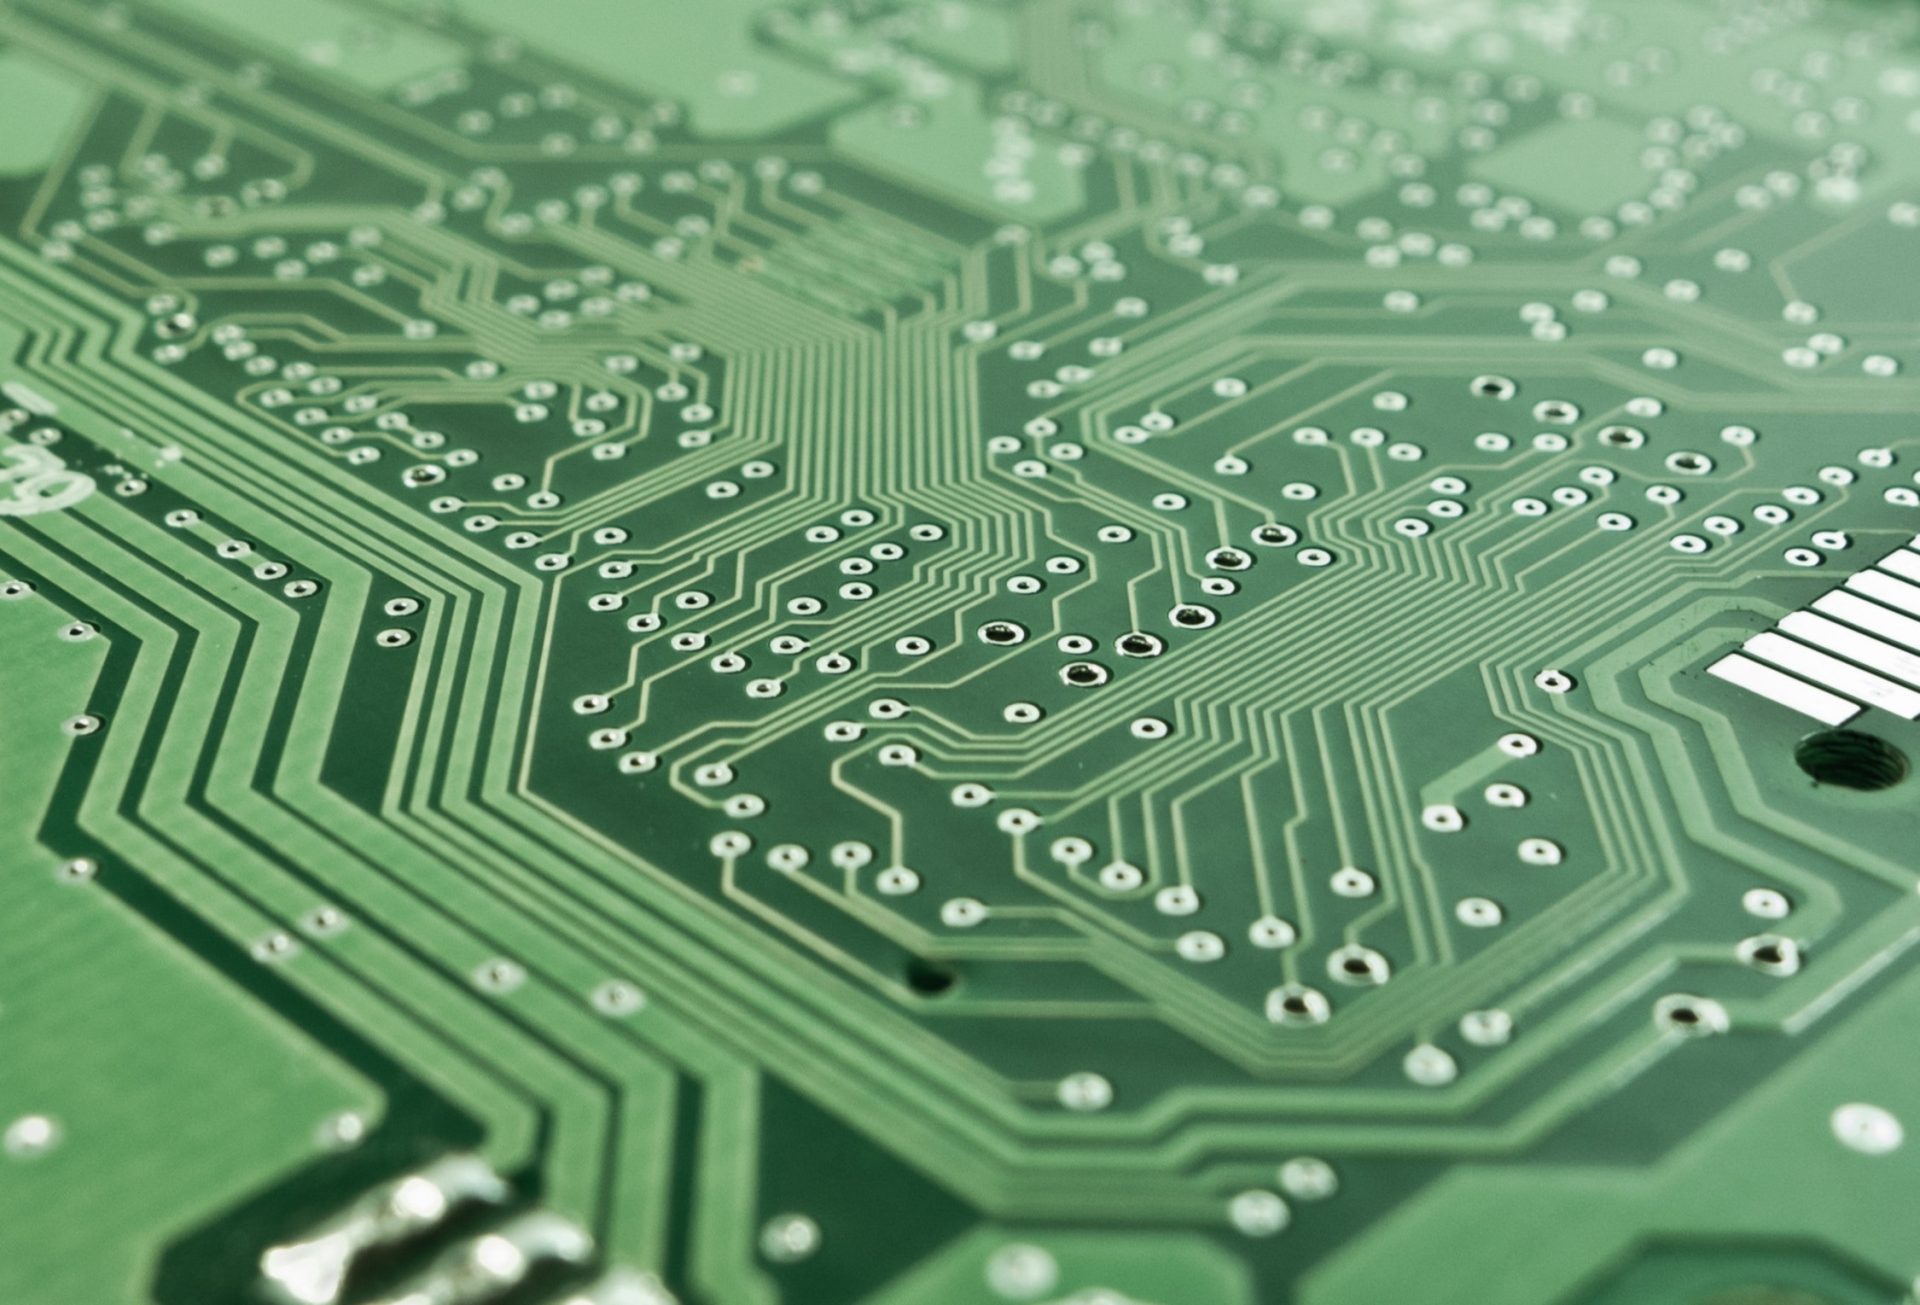 Close up view of a circuit board